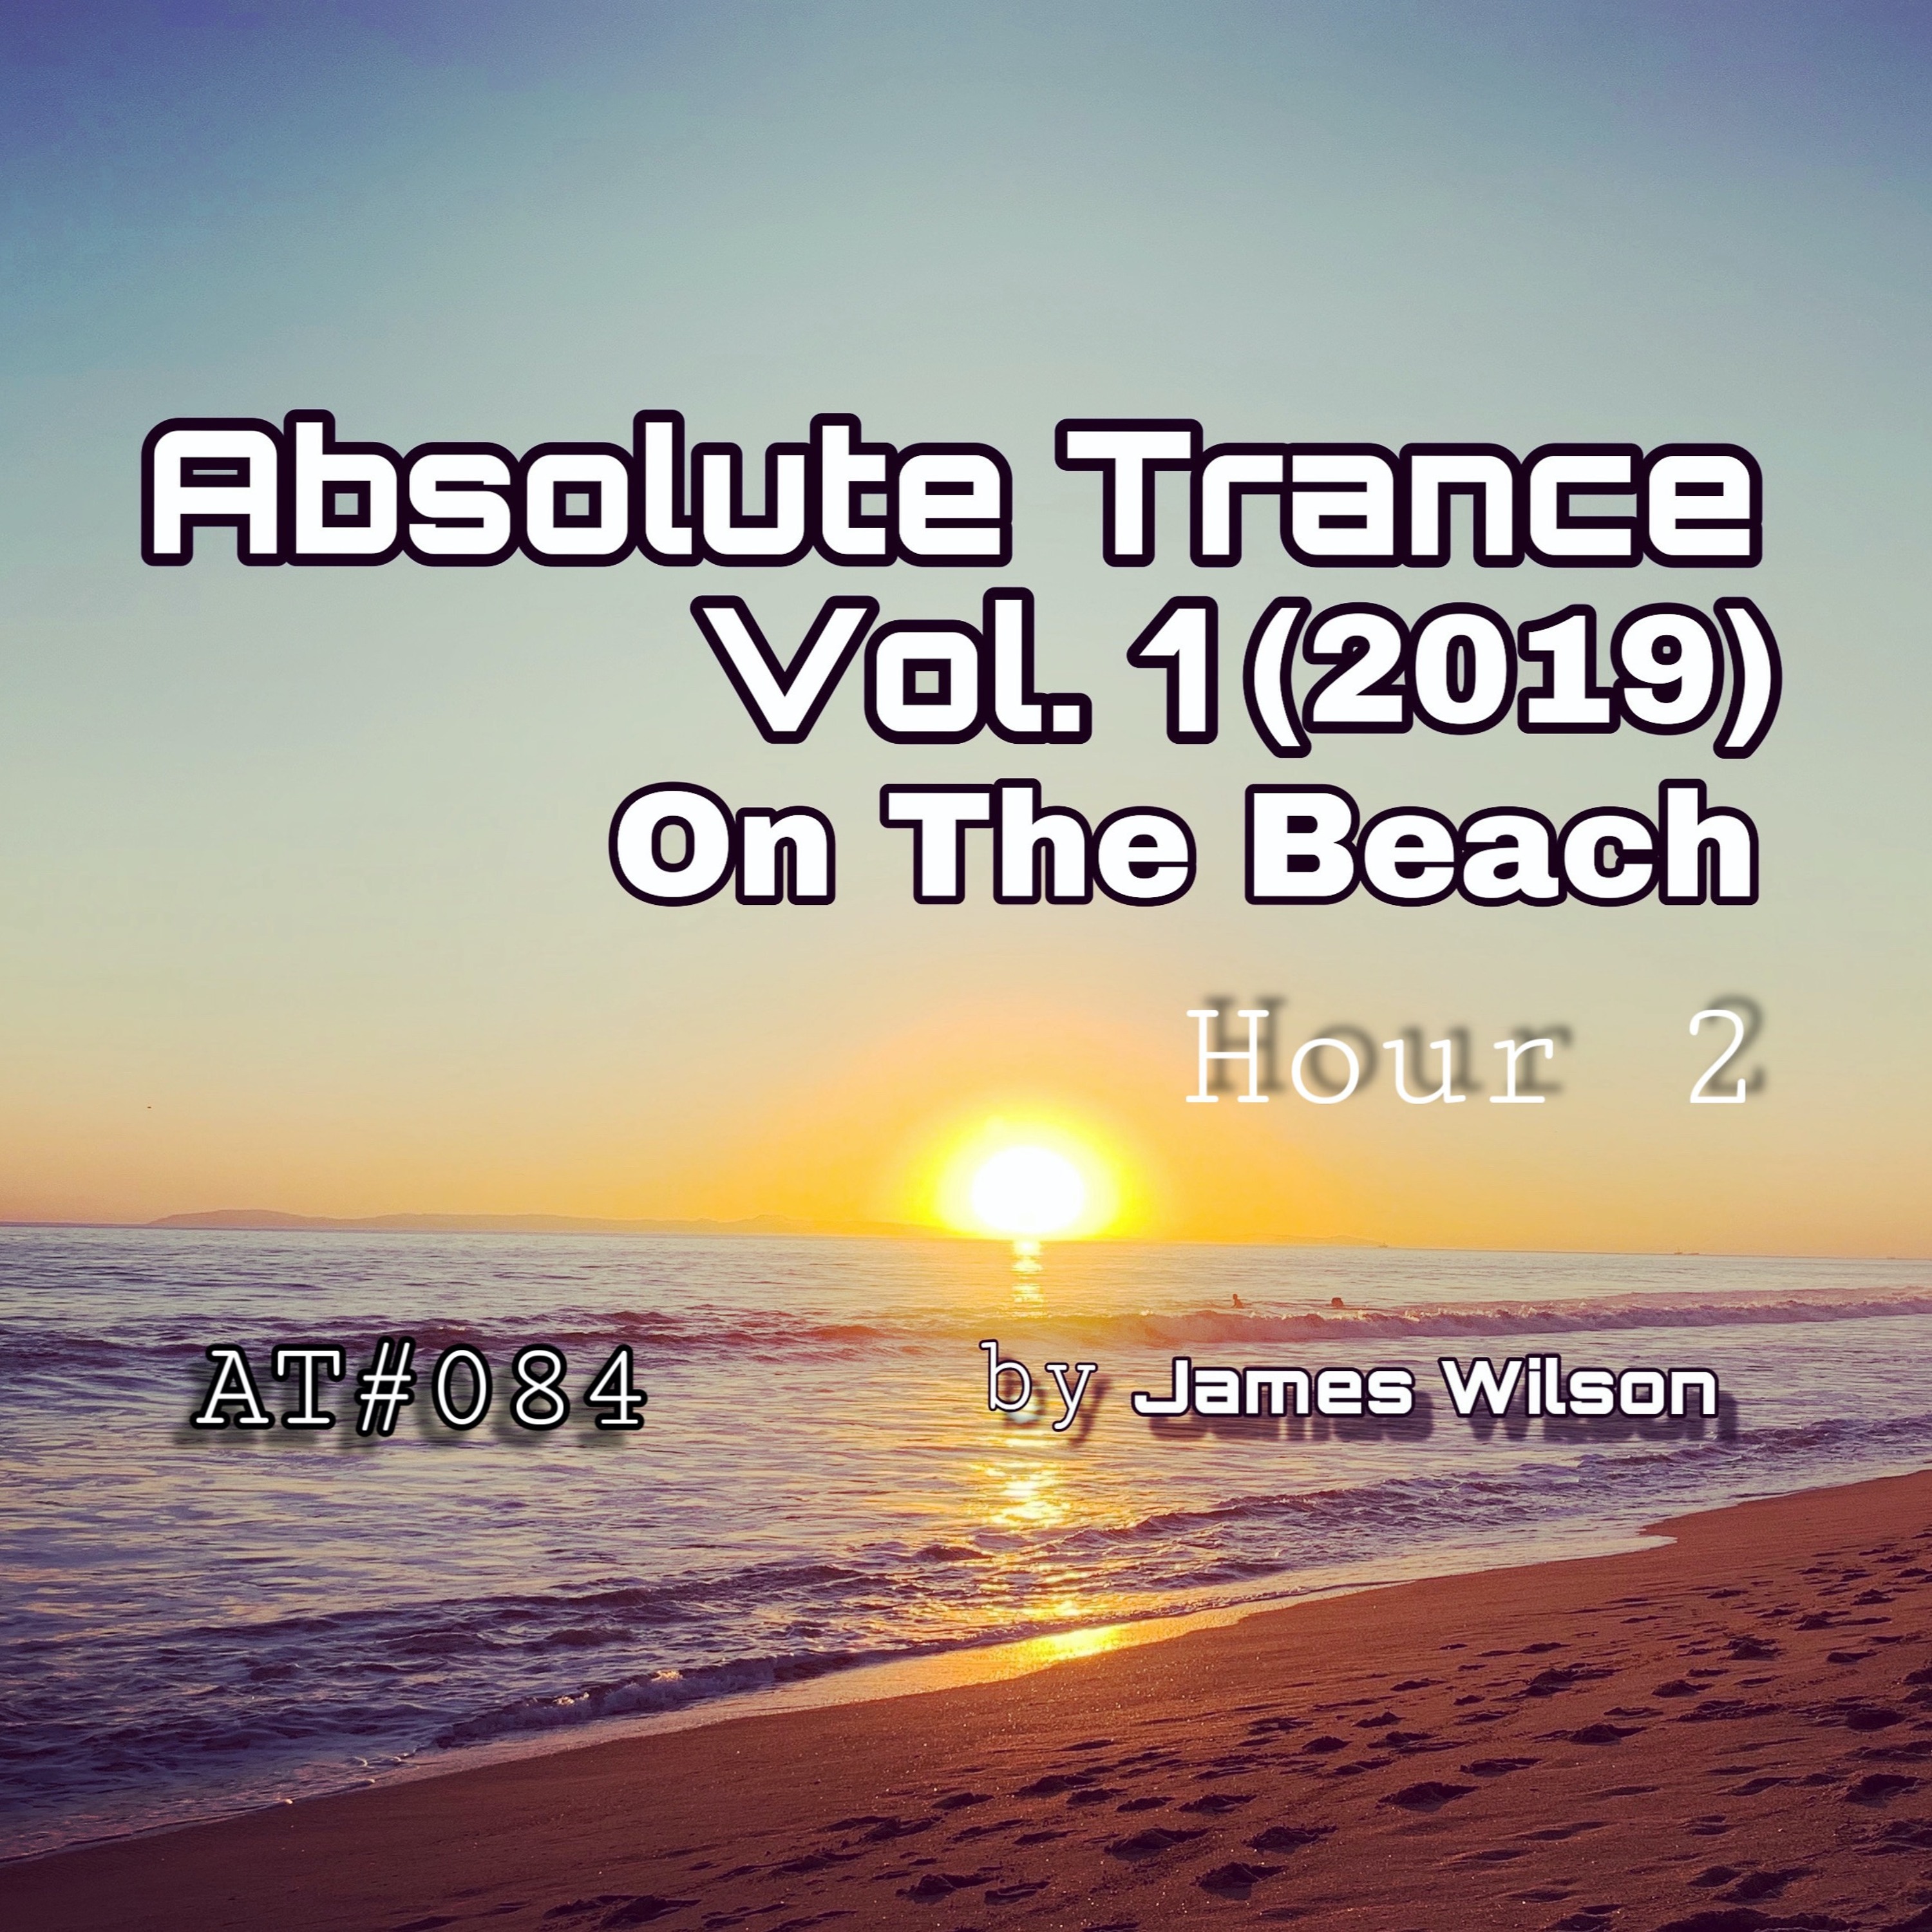 Absolute Trance Vol. 1 2019 On The Beach [Hour 2], AT#084